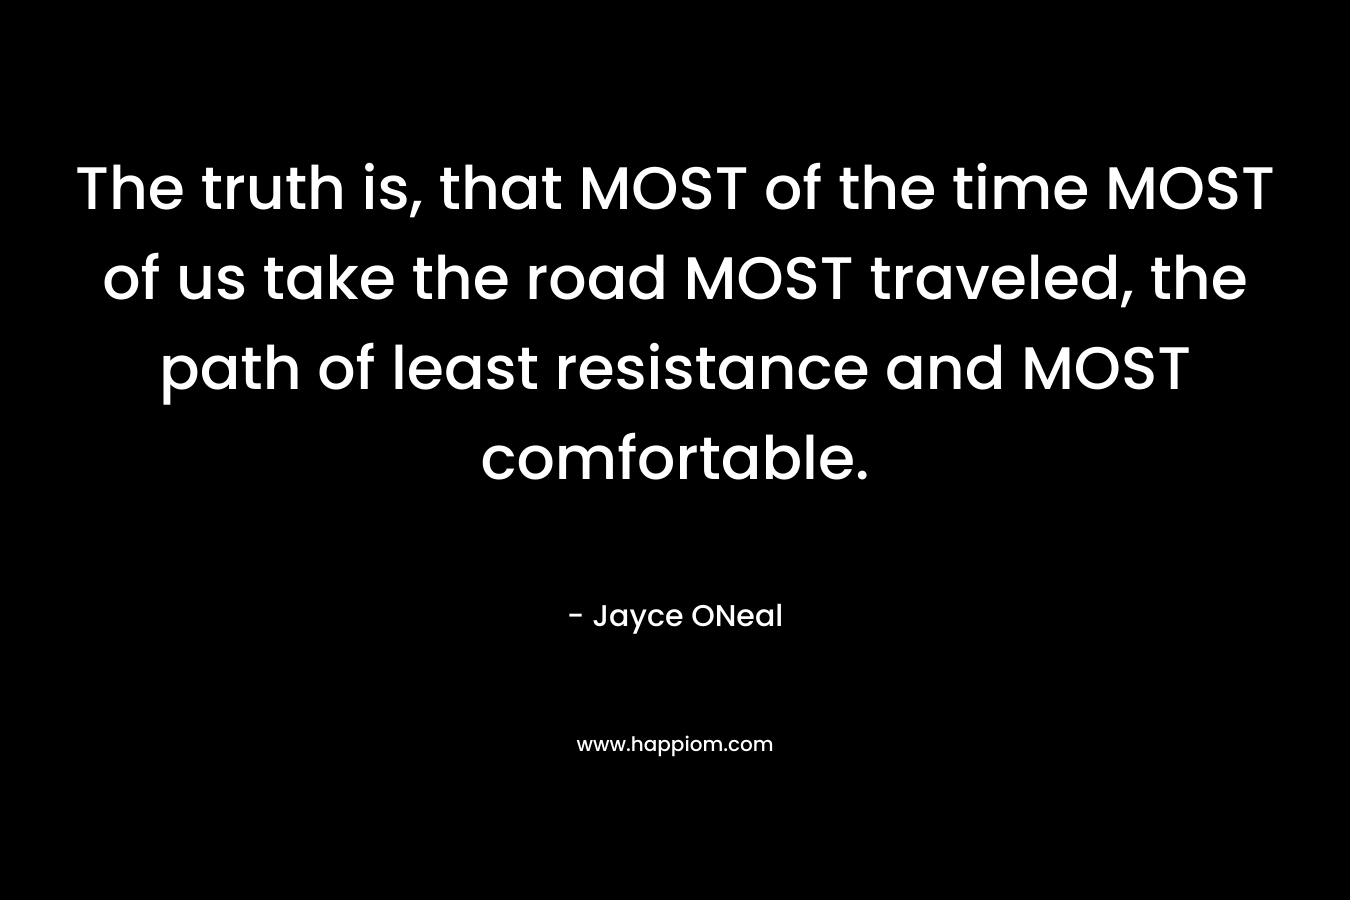 The truth is, that MOST of the time MOST of us take the road MOST traveled, the path of least resistance and MOST comfortable.